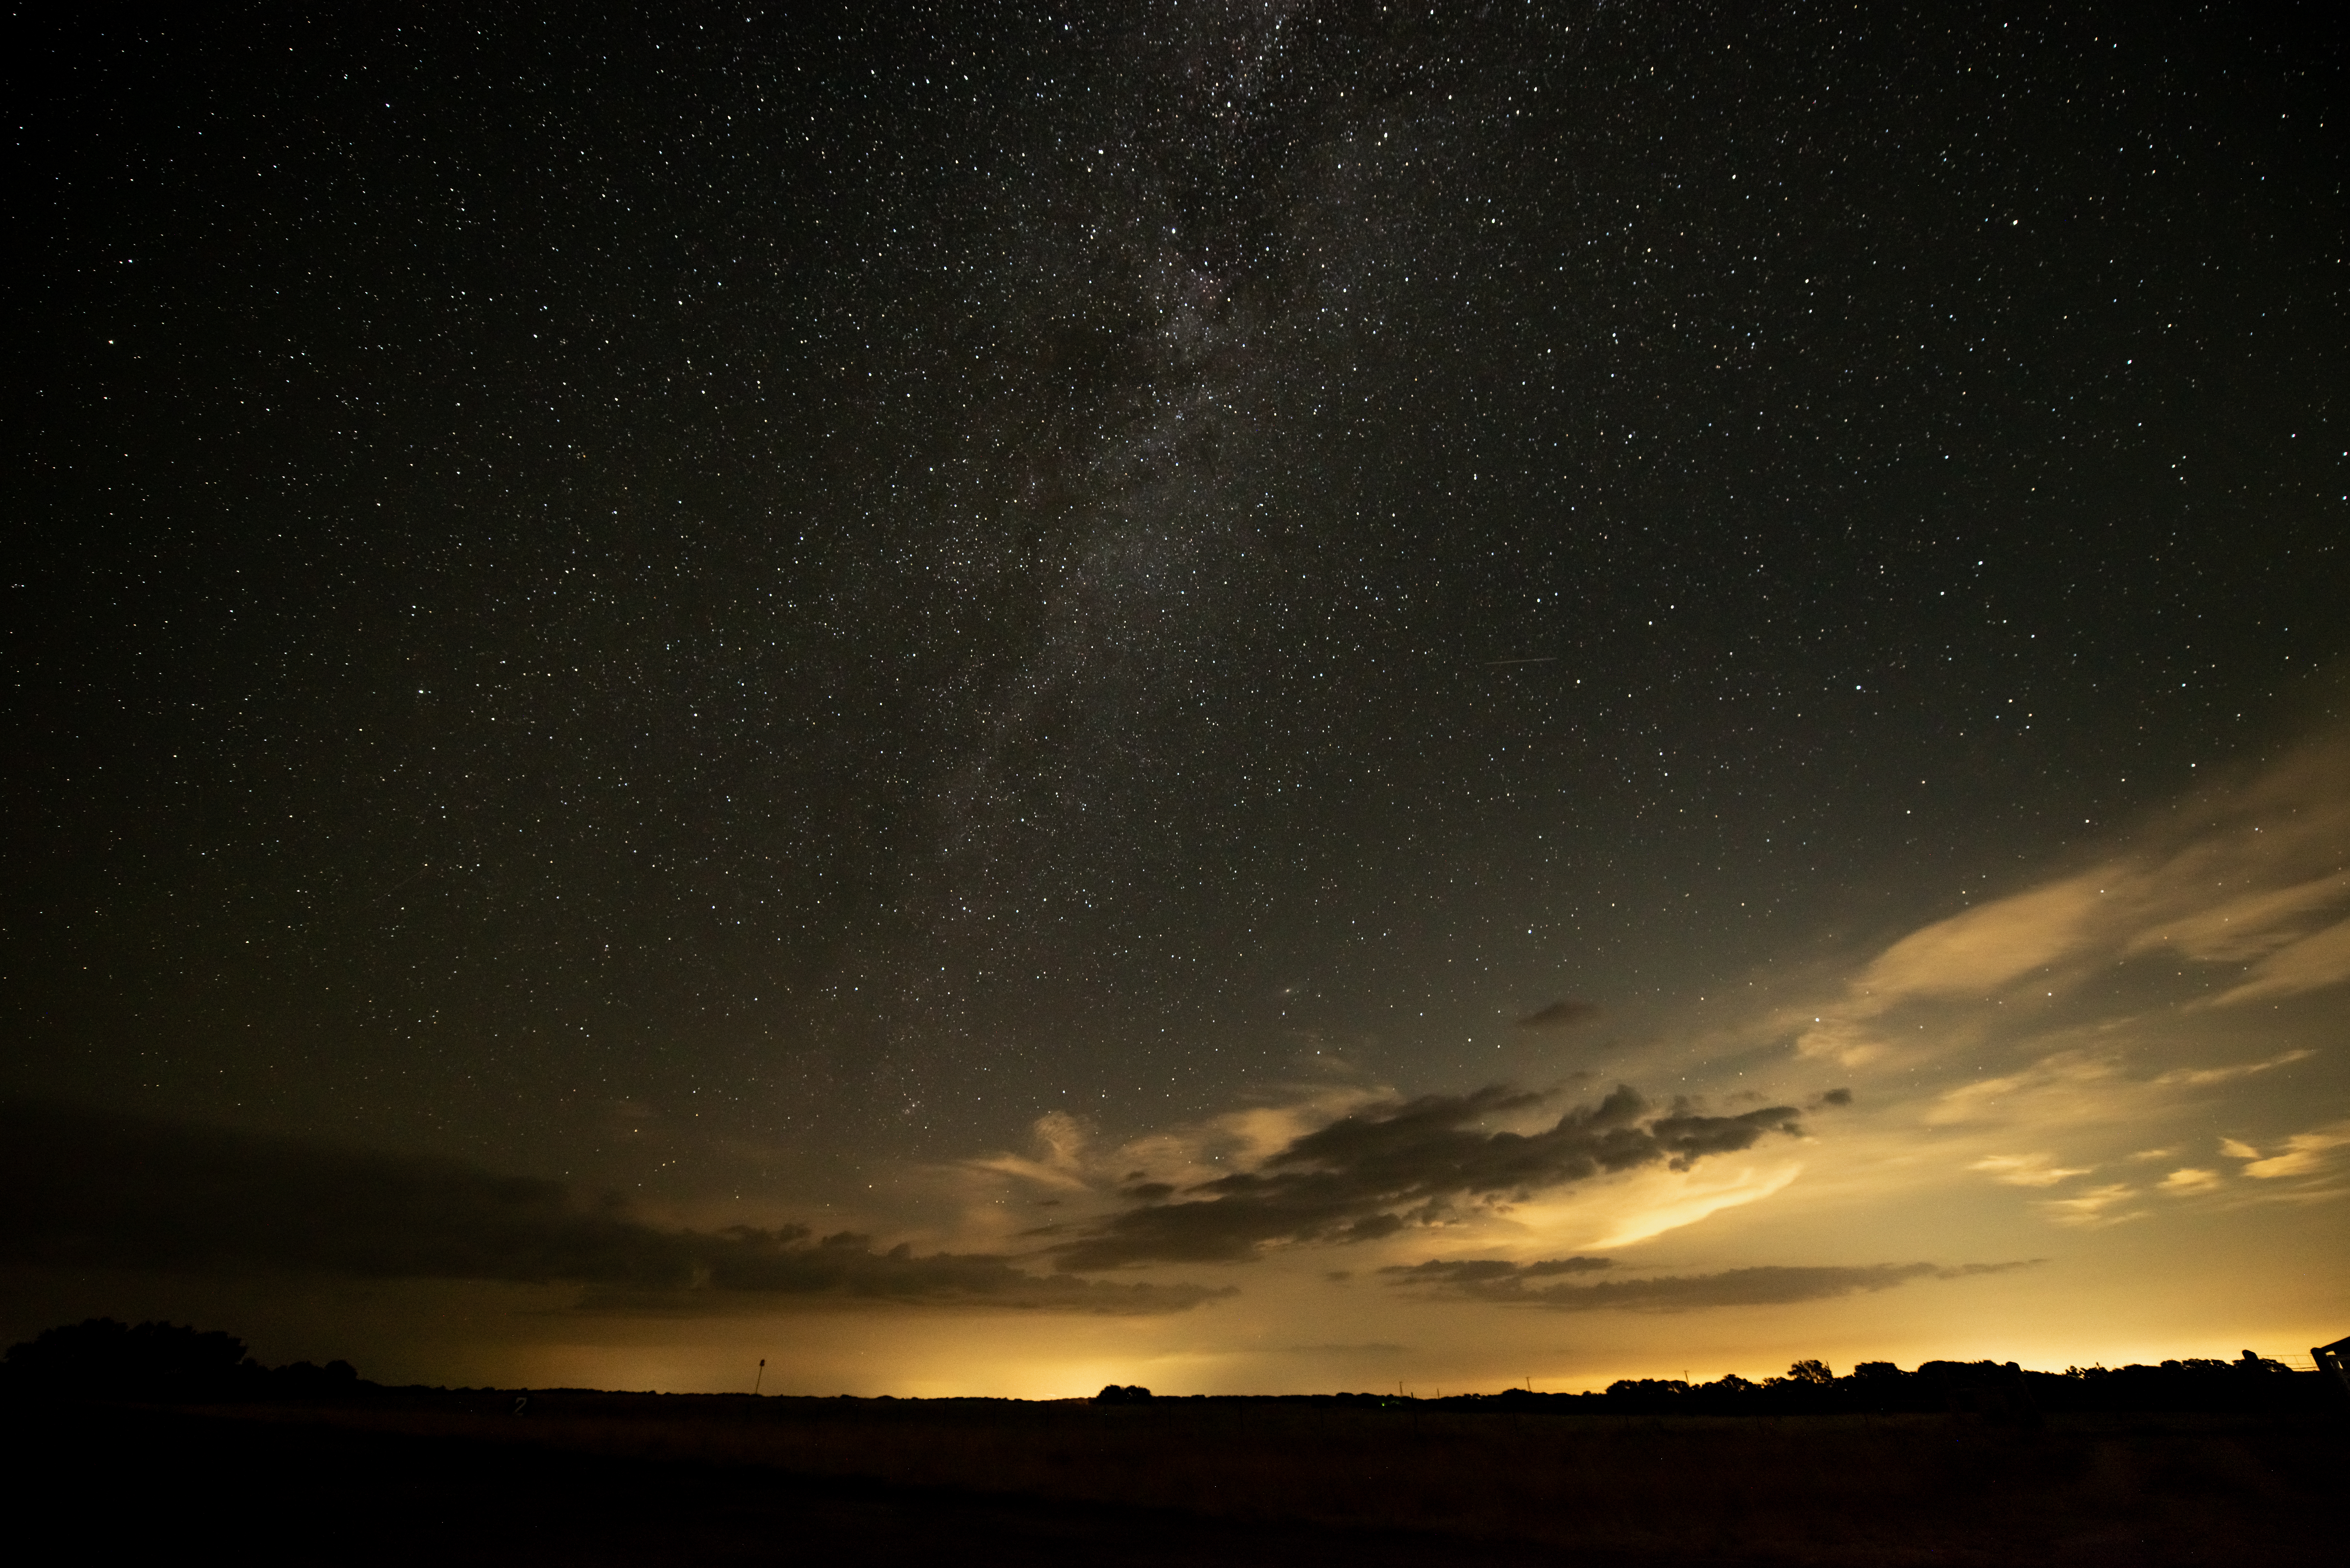 The Milky Way becomes visible over the LBJ Ranch as the sky darkens.